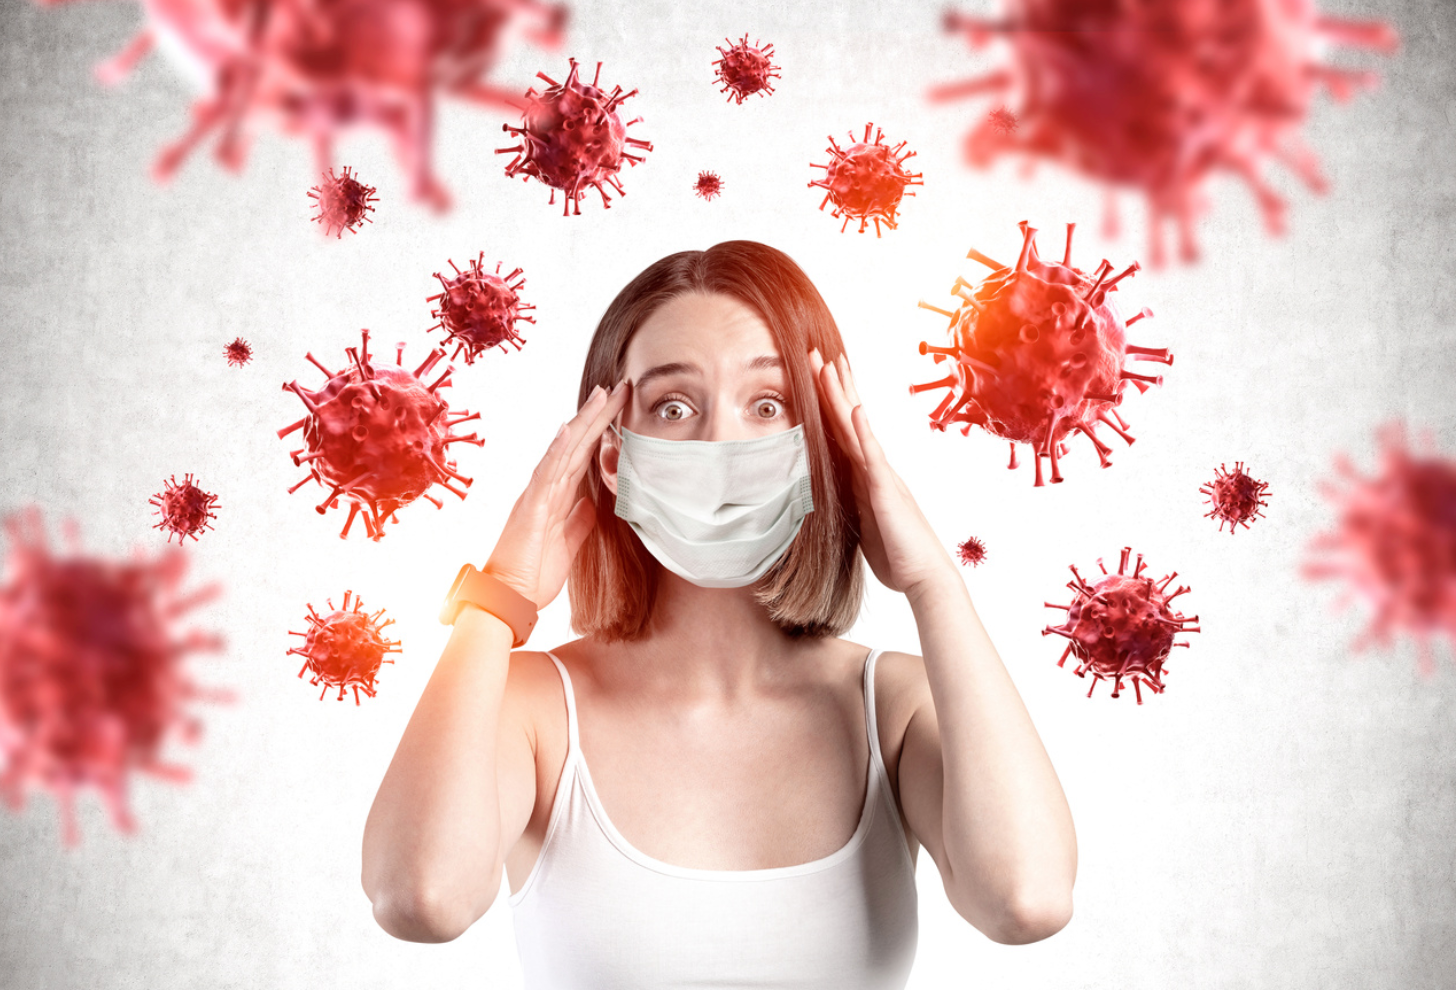 Study Finds Critical Need for Long-Term Mental Health Data During COVID-19 Pandemic